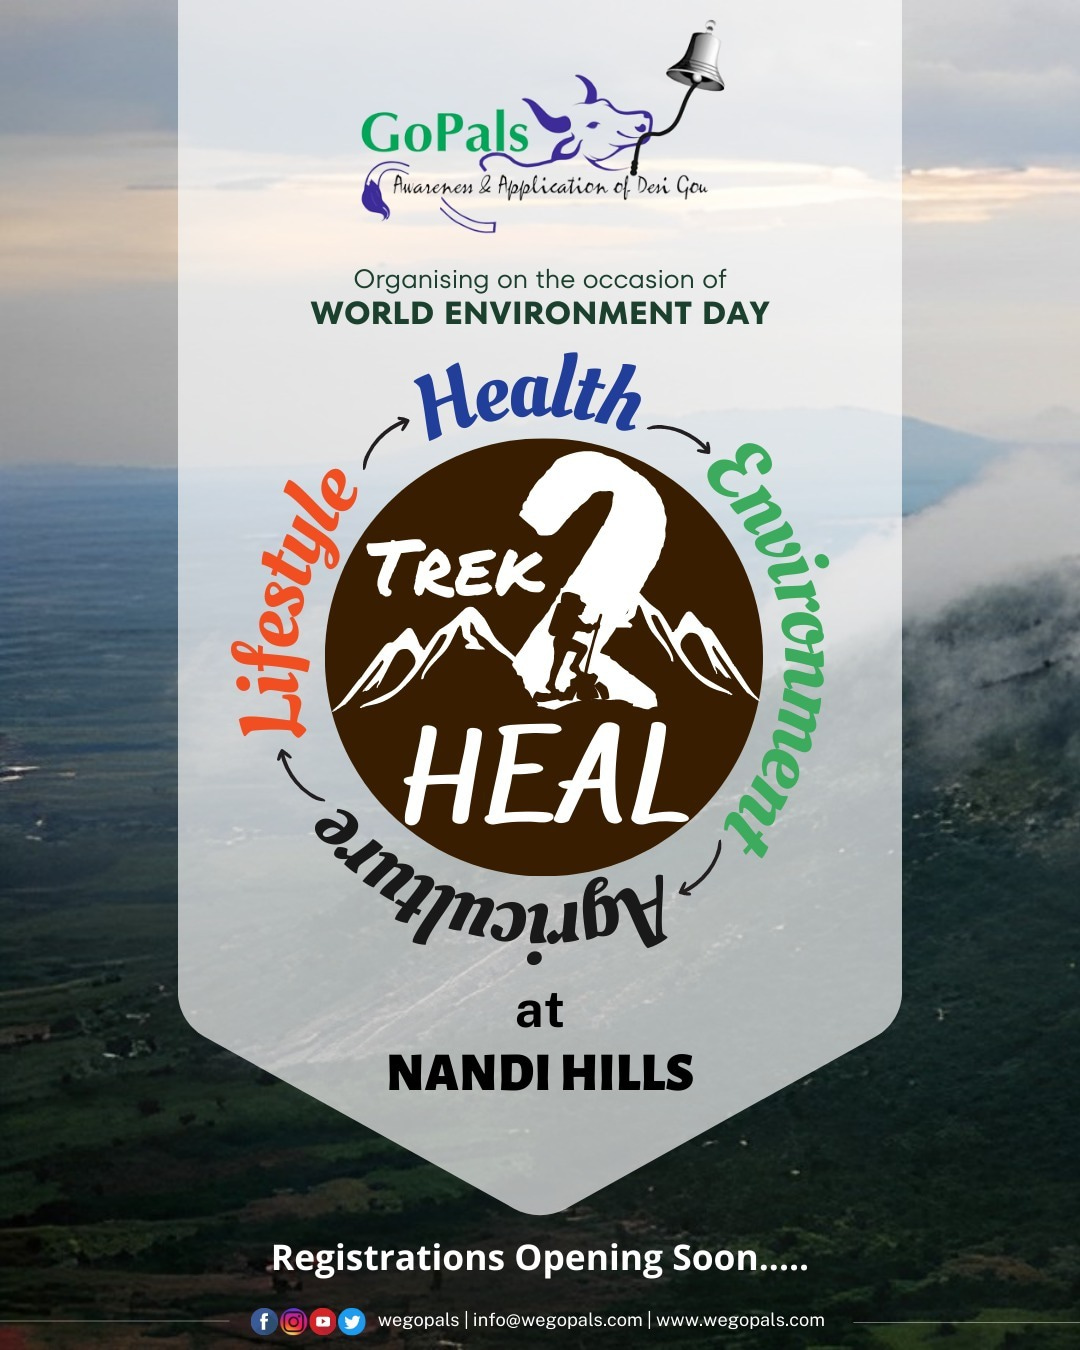 An e-poster of 'Trek to heal' organized by GoPals.